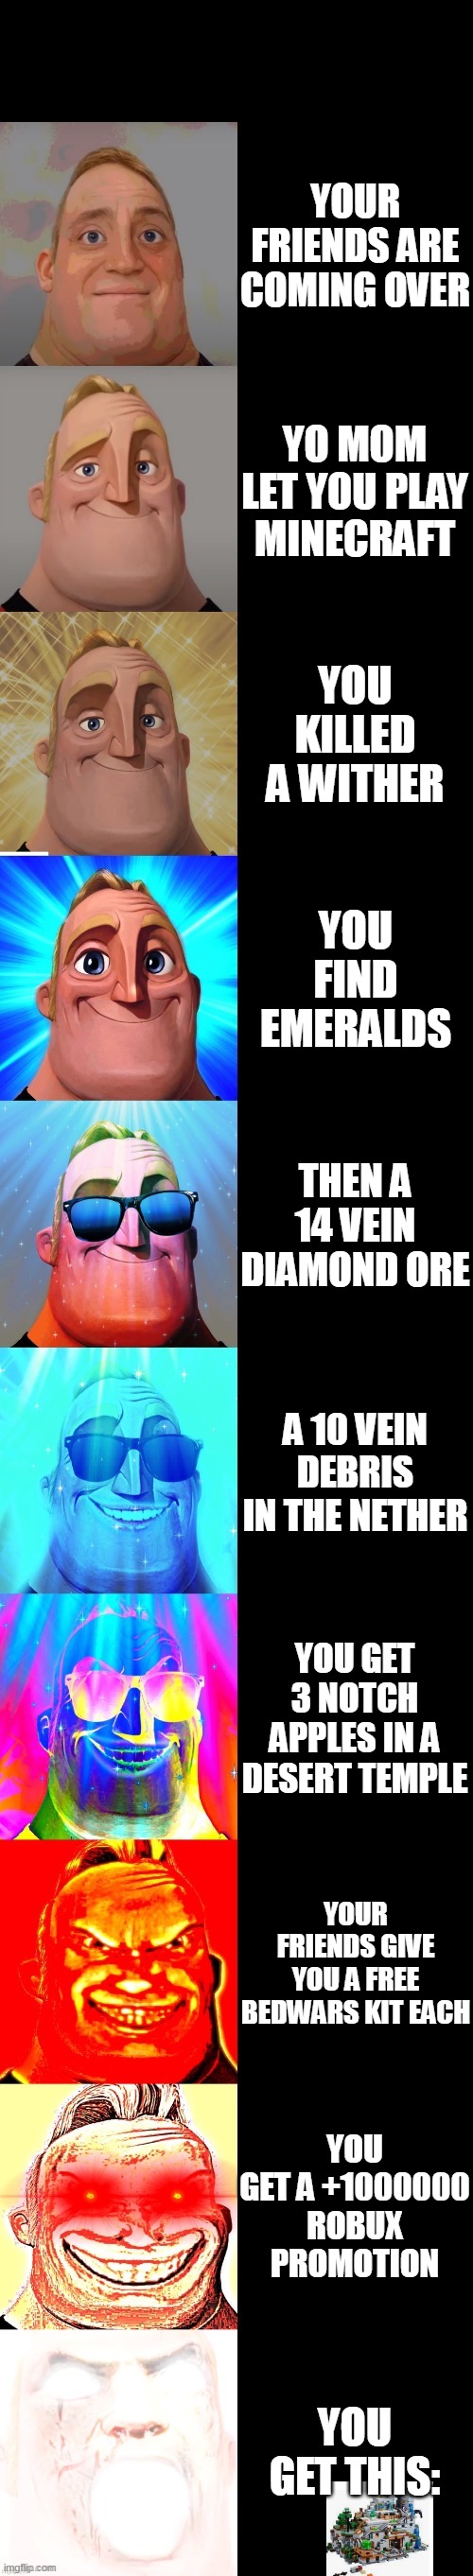 mr incredible becoming canny | YOUR FRIENDS ARE COMING OVER; YO MOM LET YOU PLAY MINECRAFT; YOU KILLED A WITHER; YOU FIND EMERALDS; THEN A 14 VEIN DIAMOND ORE; A 10 VEIN DEBRIS IN THE NETHER; YOU GET 3 NOTCH APPLES IN A DESERT TEMPLE; YOUR FRIENDS GIVE YOU A FREE BEDWARS KIT EACH; YOU GET A +1000000 ROBUX PROMOTION; YOU GET THIS: | image tagged in mr incredible becoming canny | made w/ Imgflip meme maker